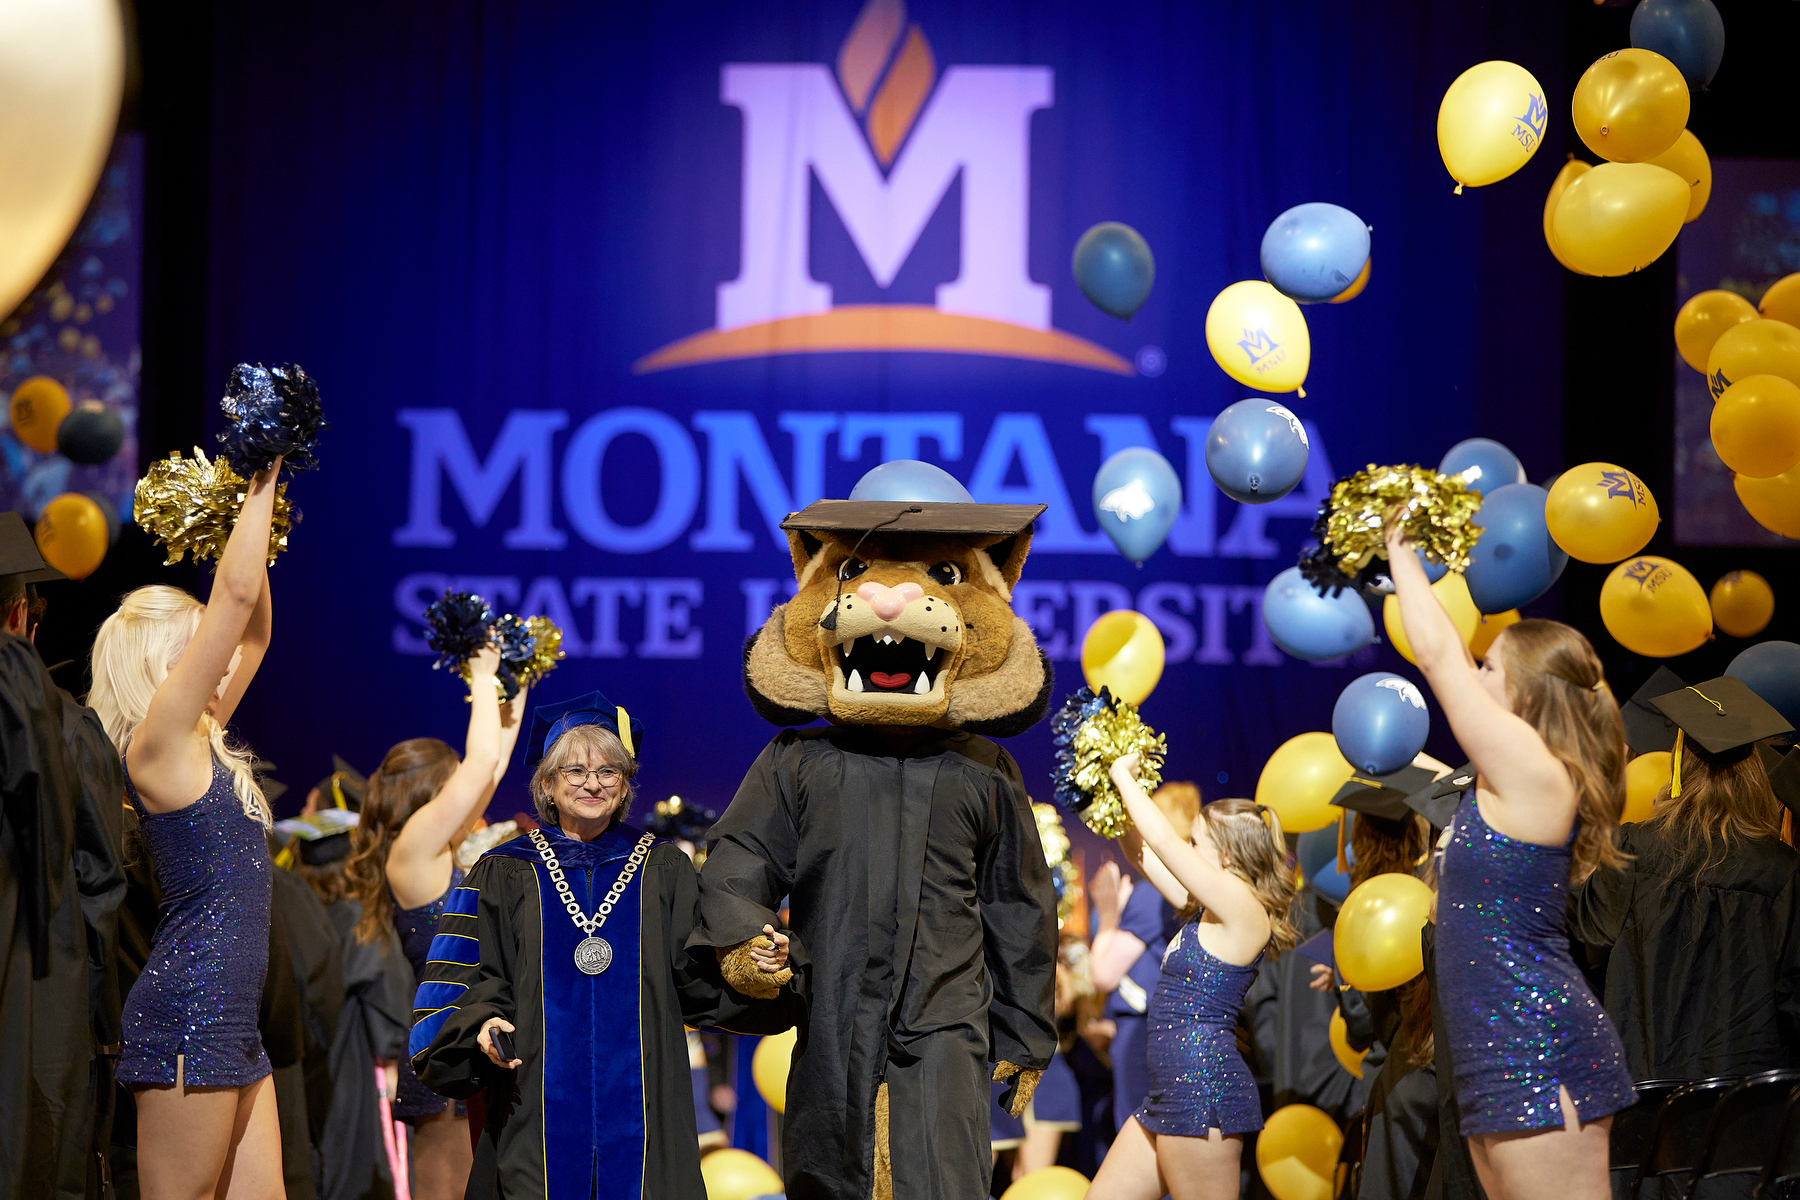 Graduation ceremony photo with woman with short hair in cap and robe walking with Champ the Bobcat mascot wearing a cap and gown, walking through cheerleaders wearing blue and gold and the Montana State logo in the background